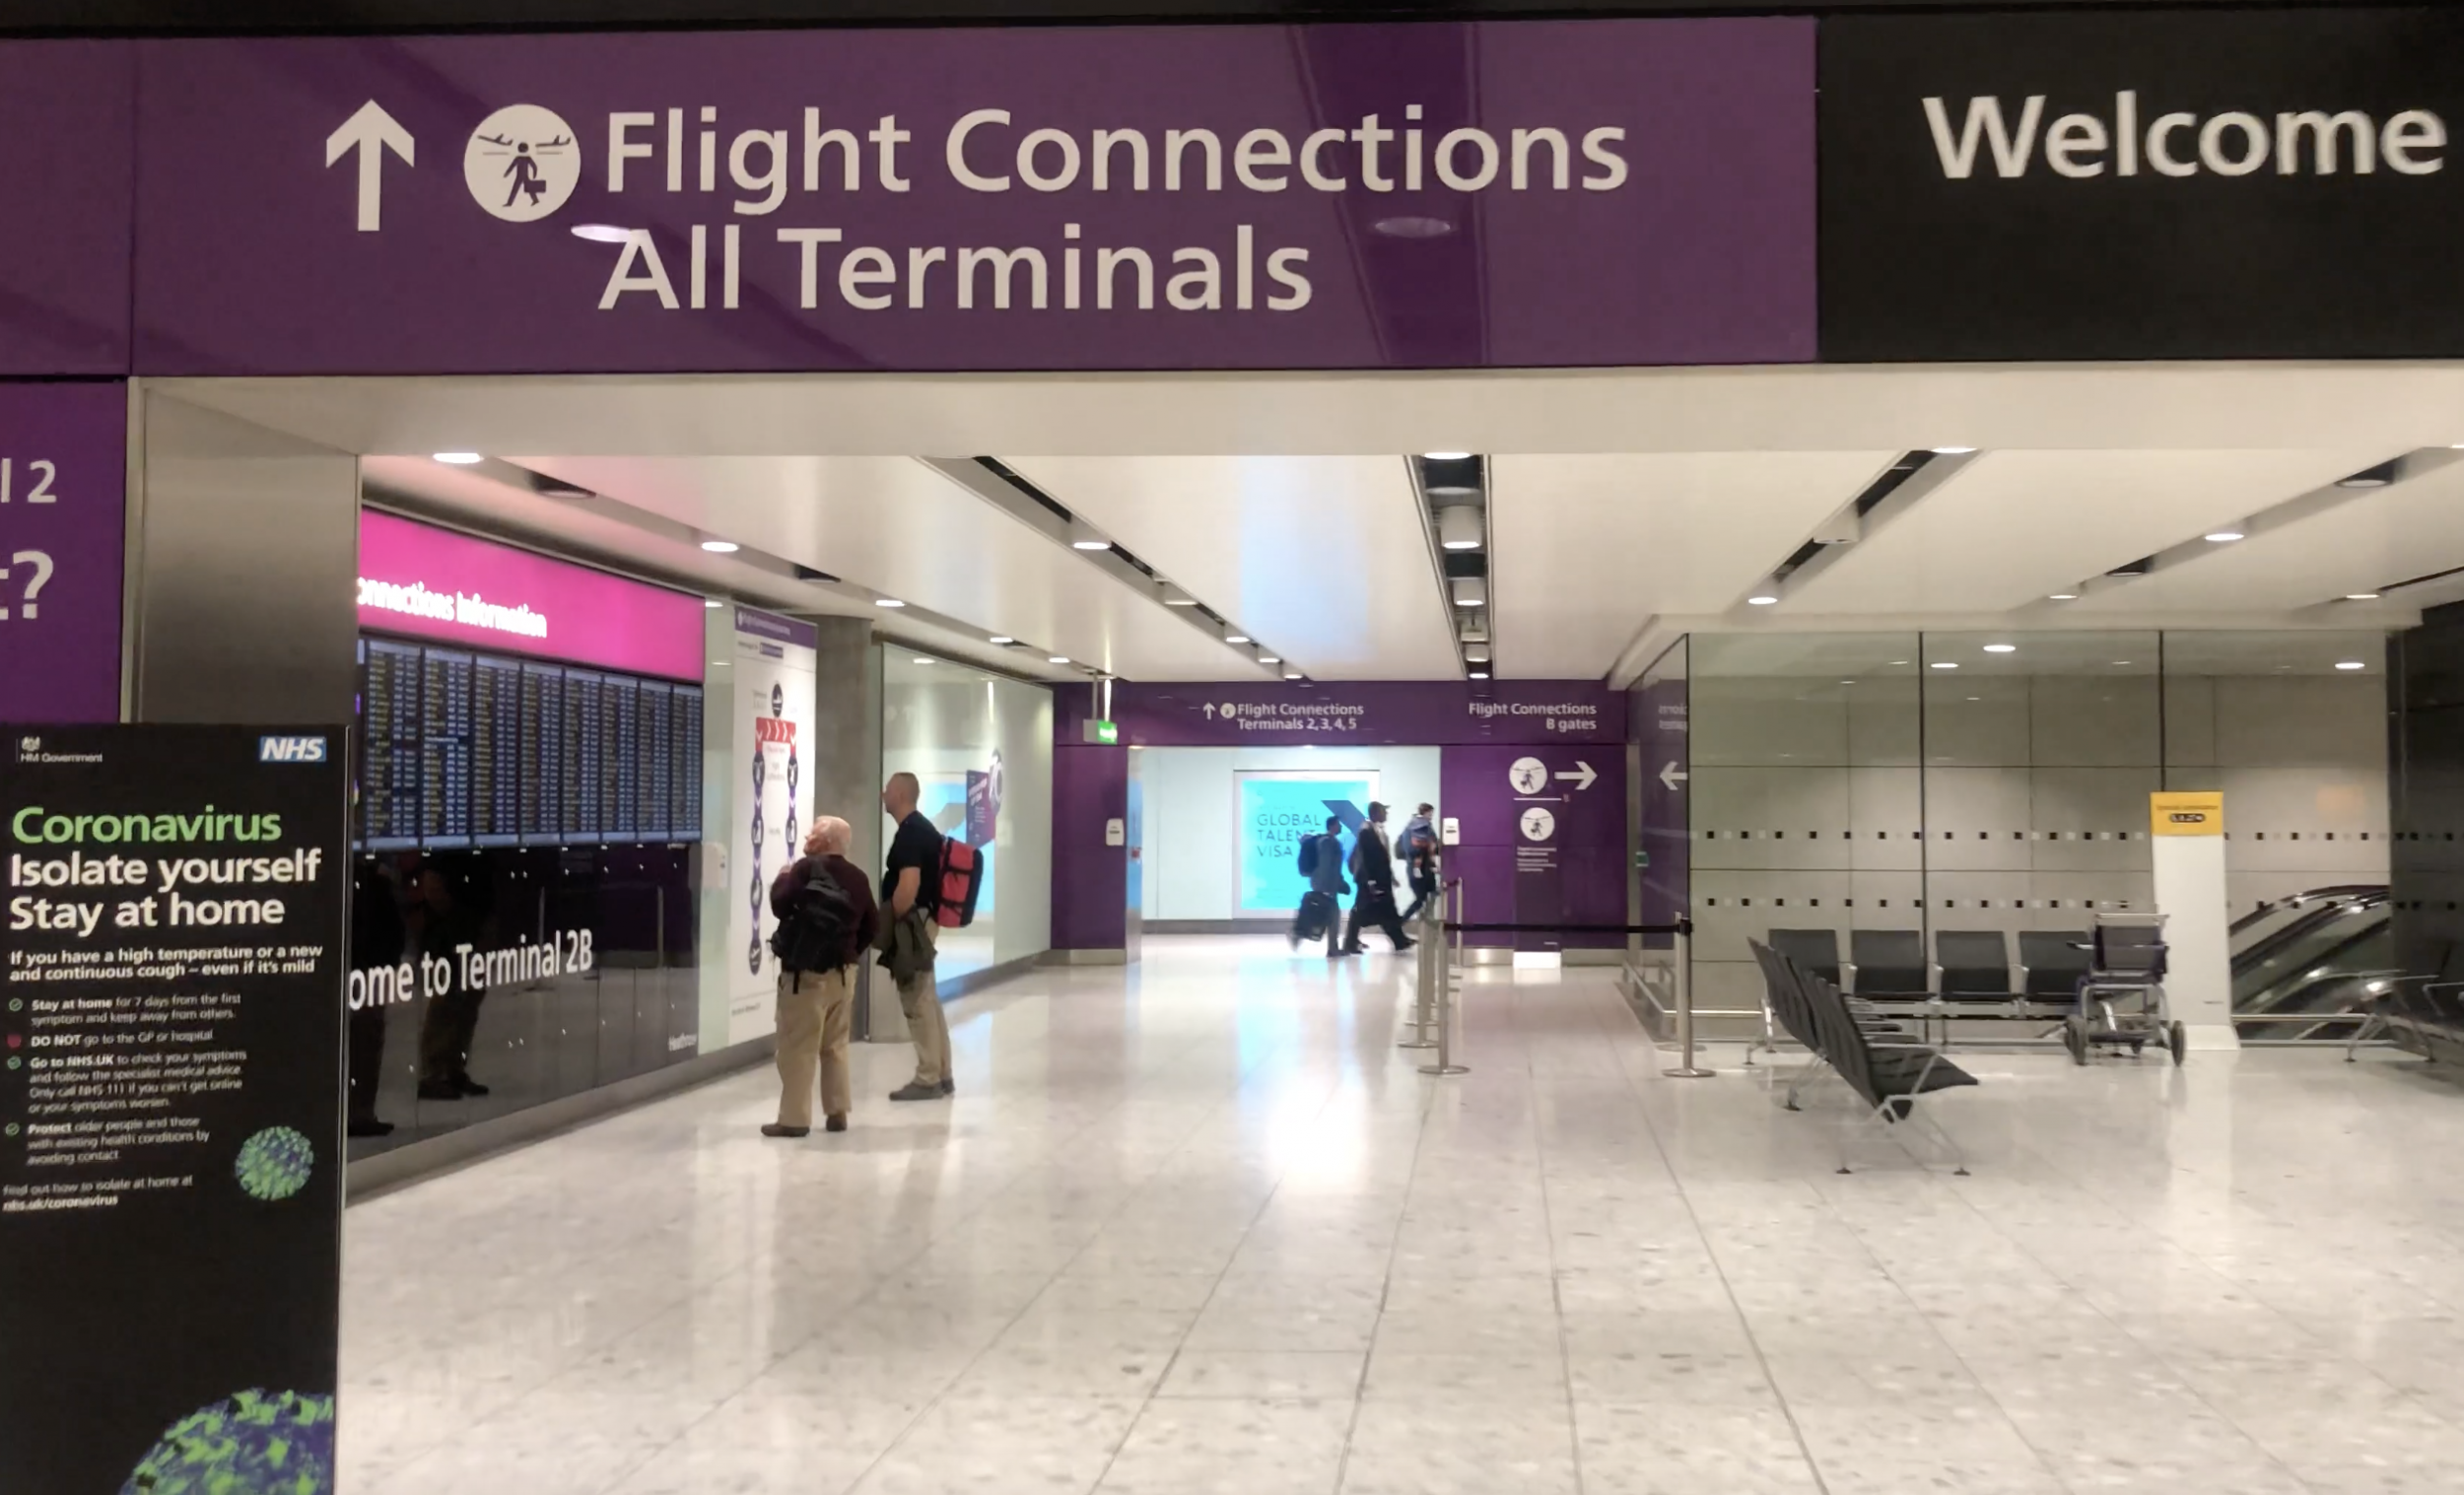 Where next? Passengers arriving at Heathrow will need to specific their destination for two weeks of self-isolation